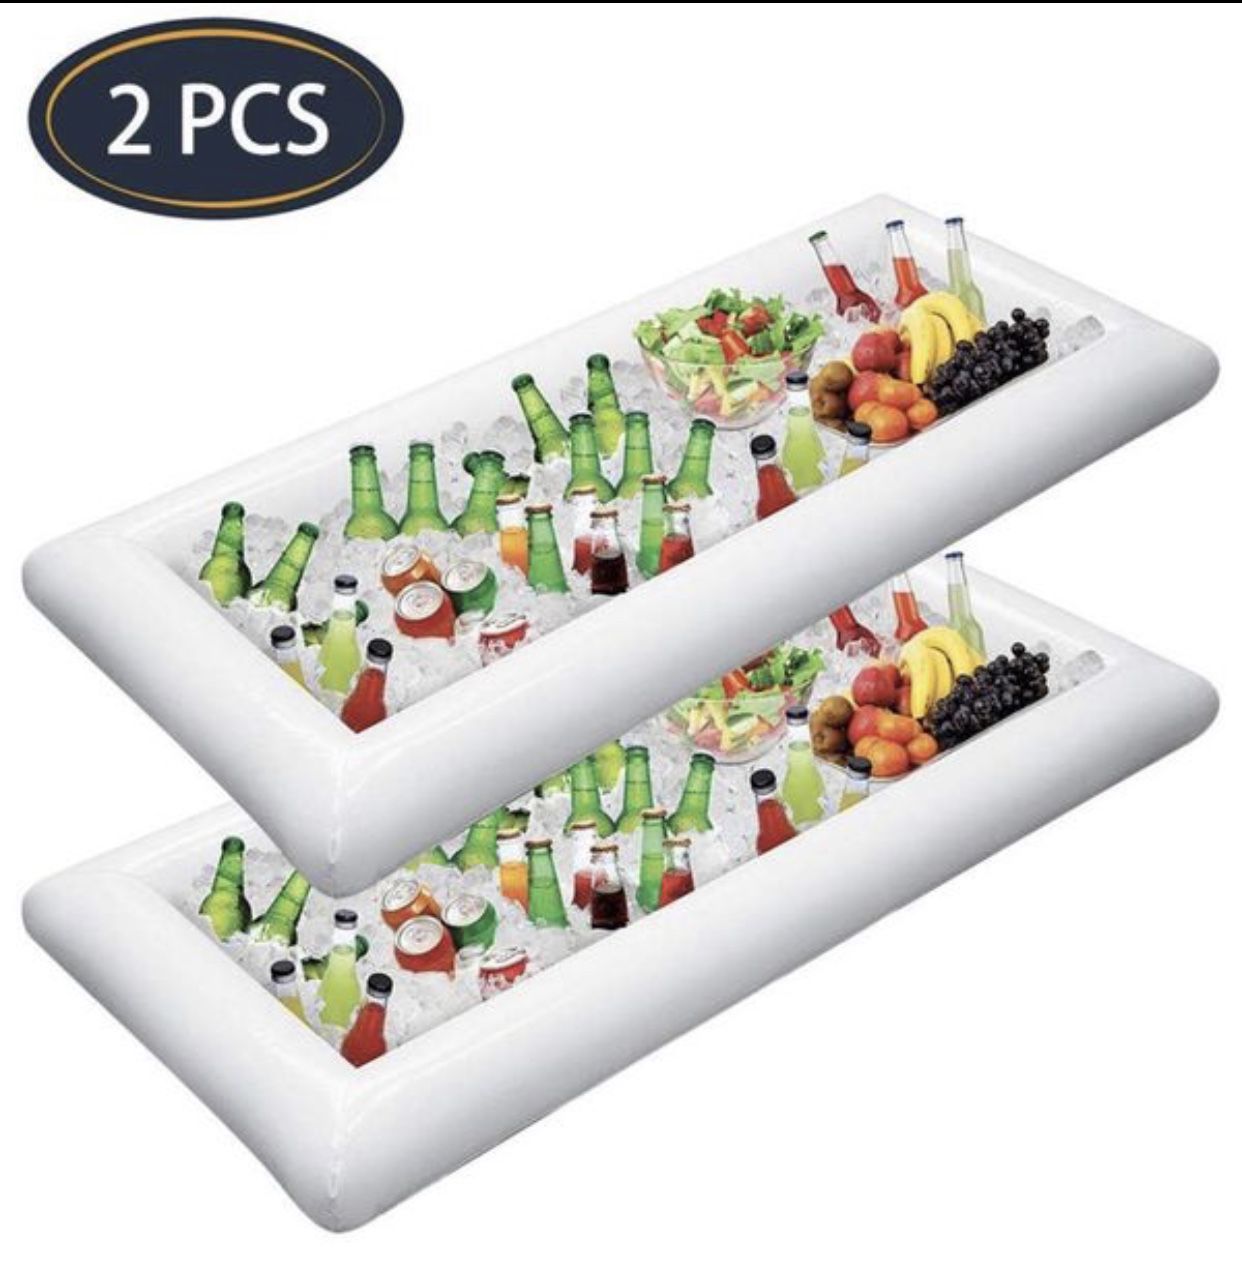 2 PCS Inflatable Serving Bars Ice Buffet Salad Serving Trays Food Drink Holder Cooler Containers Indoor Outdoor BBQ Picnic Pool Party Supplies Luau C